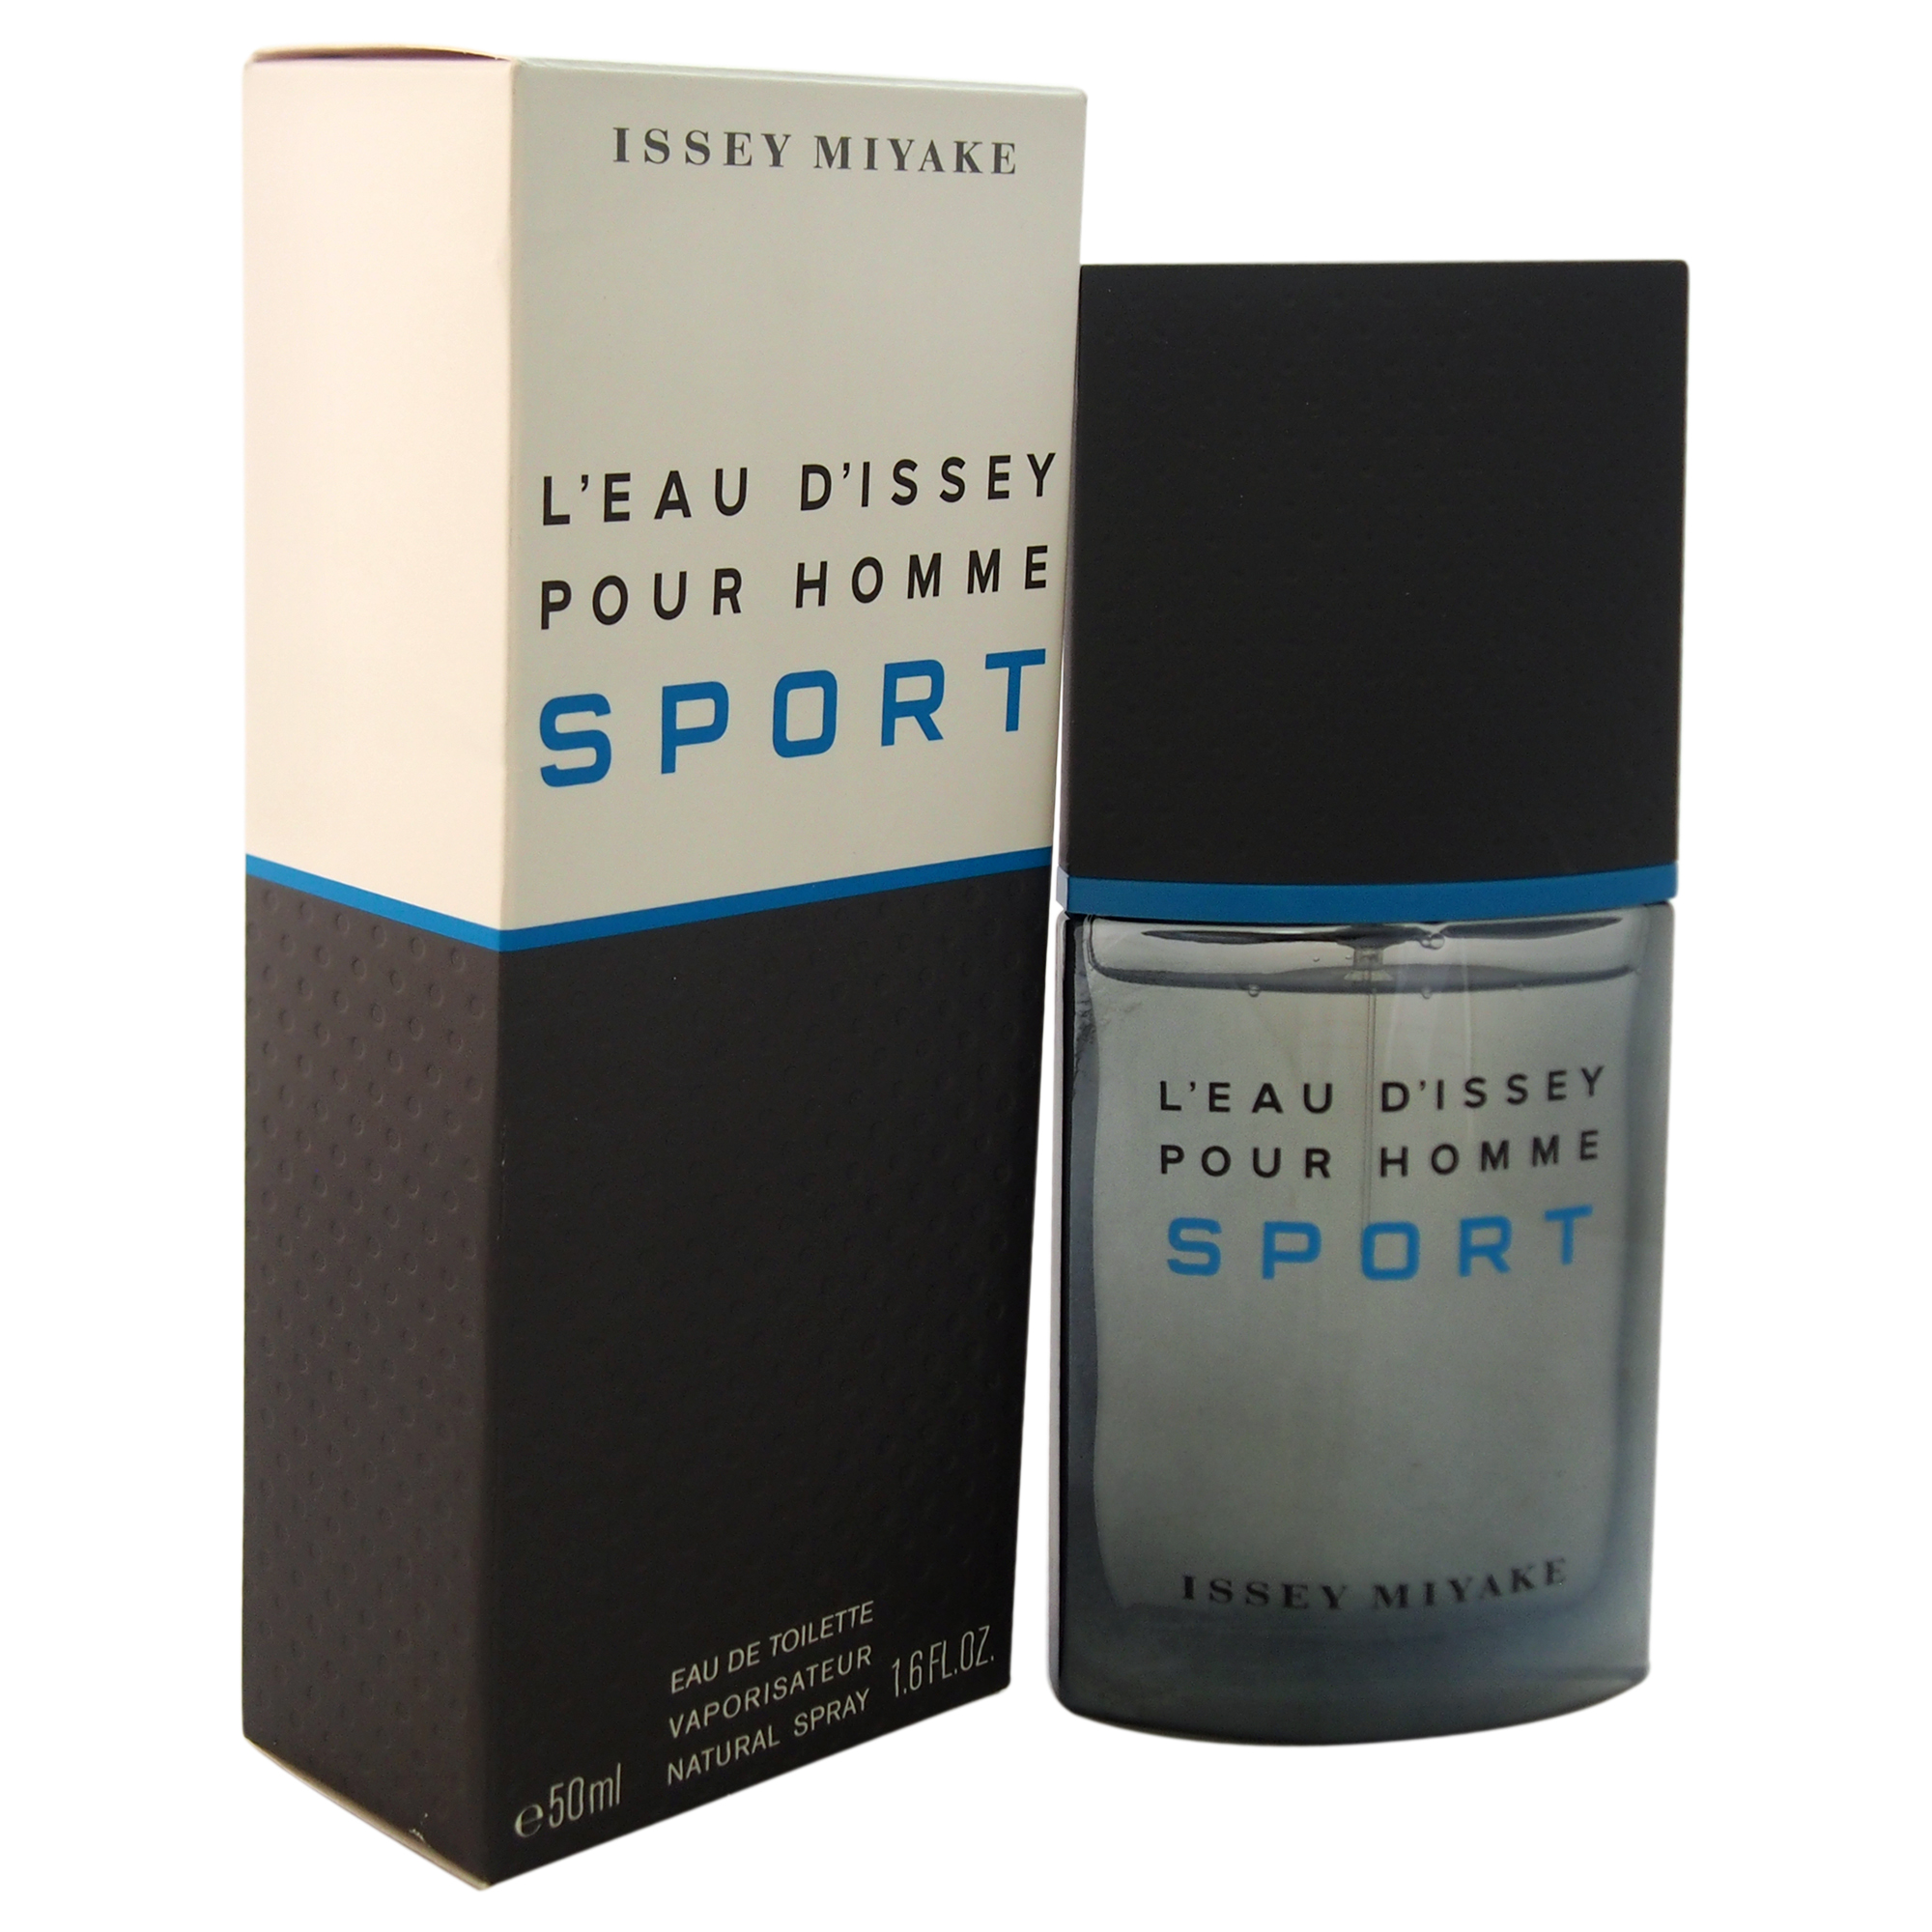 L'eau D'issey Sport by Issey Miyake for Men - 1.6 oz EDT Spray